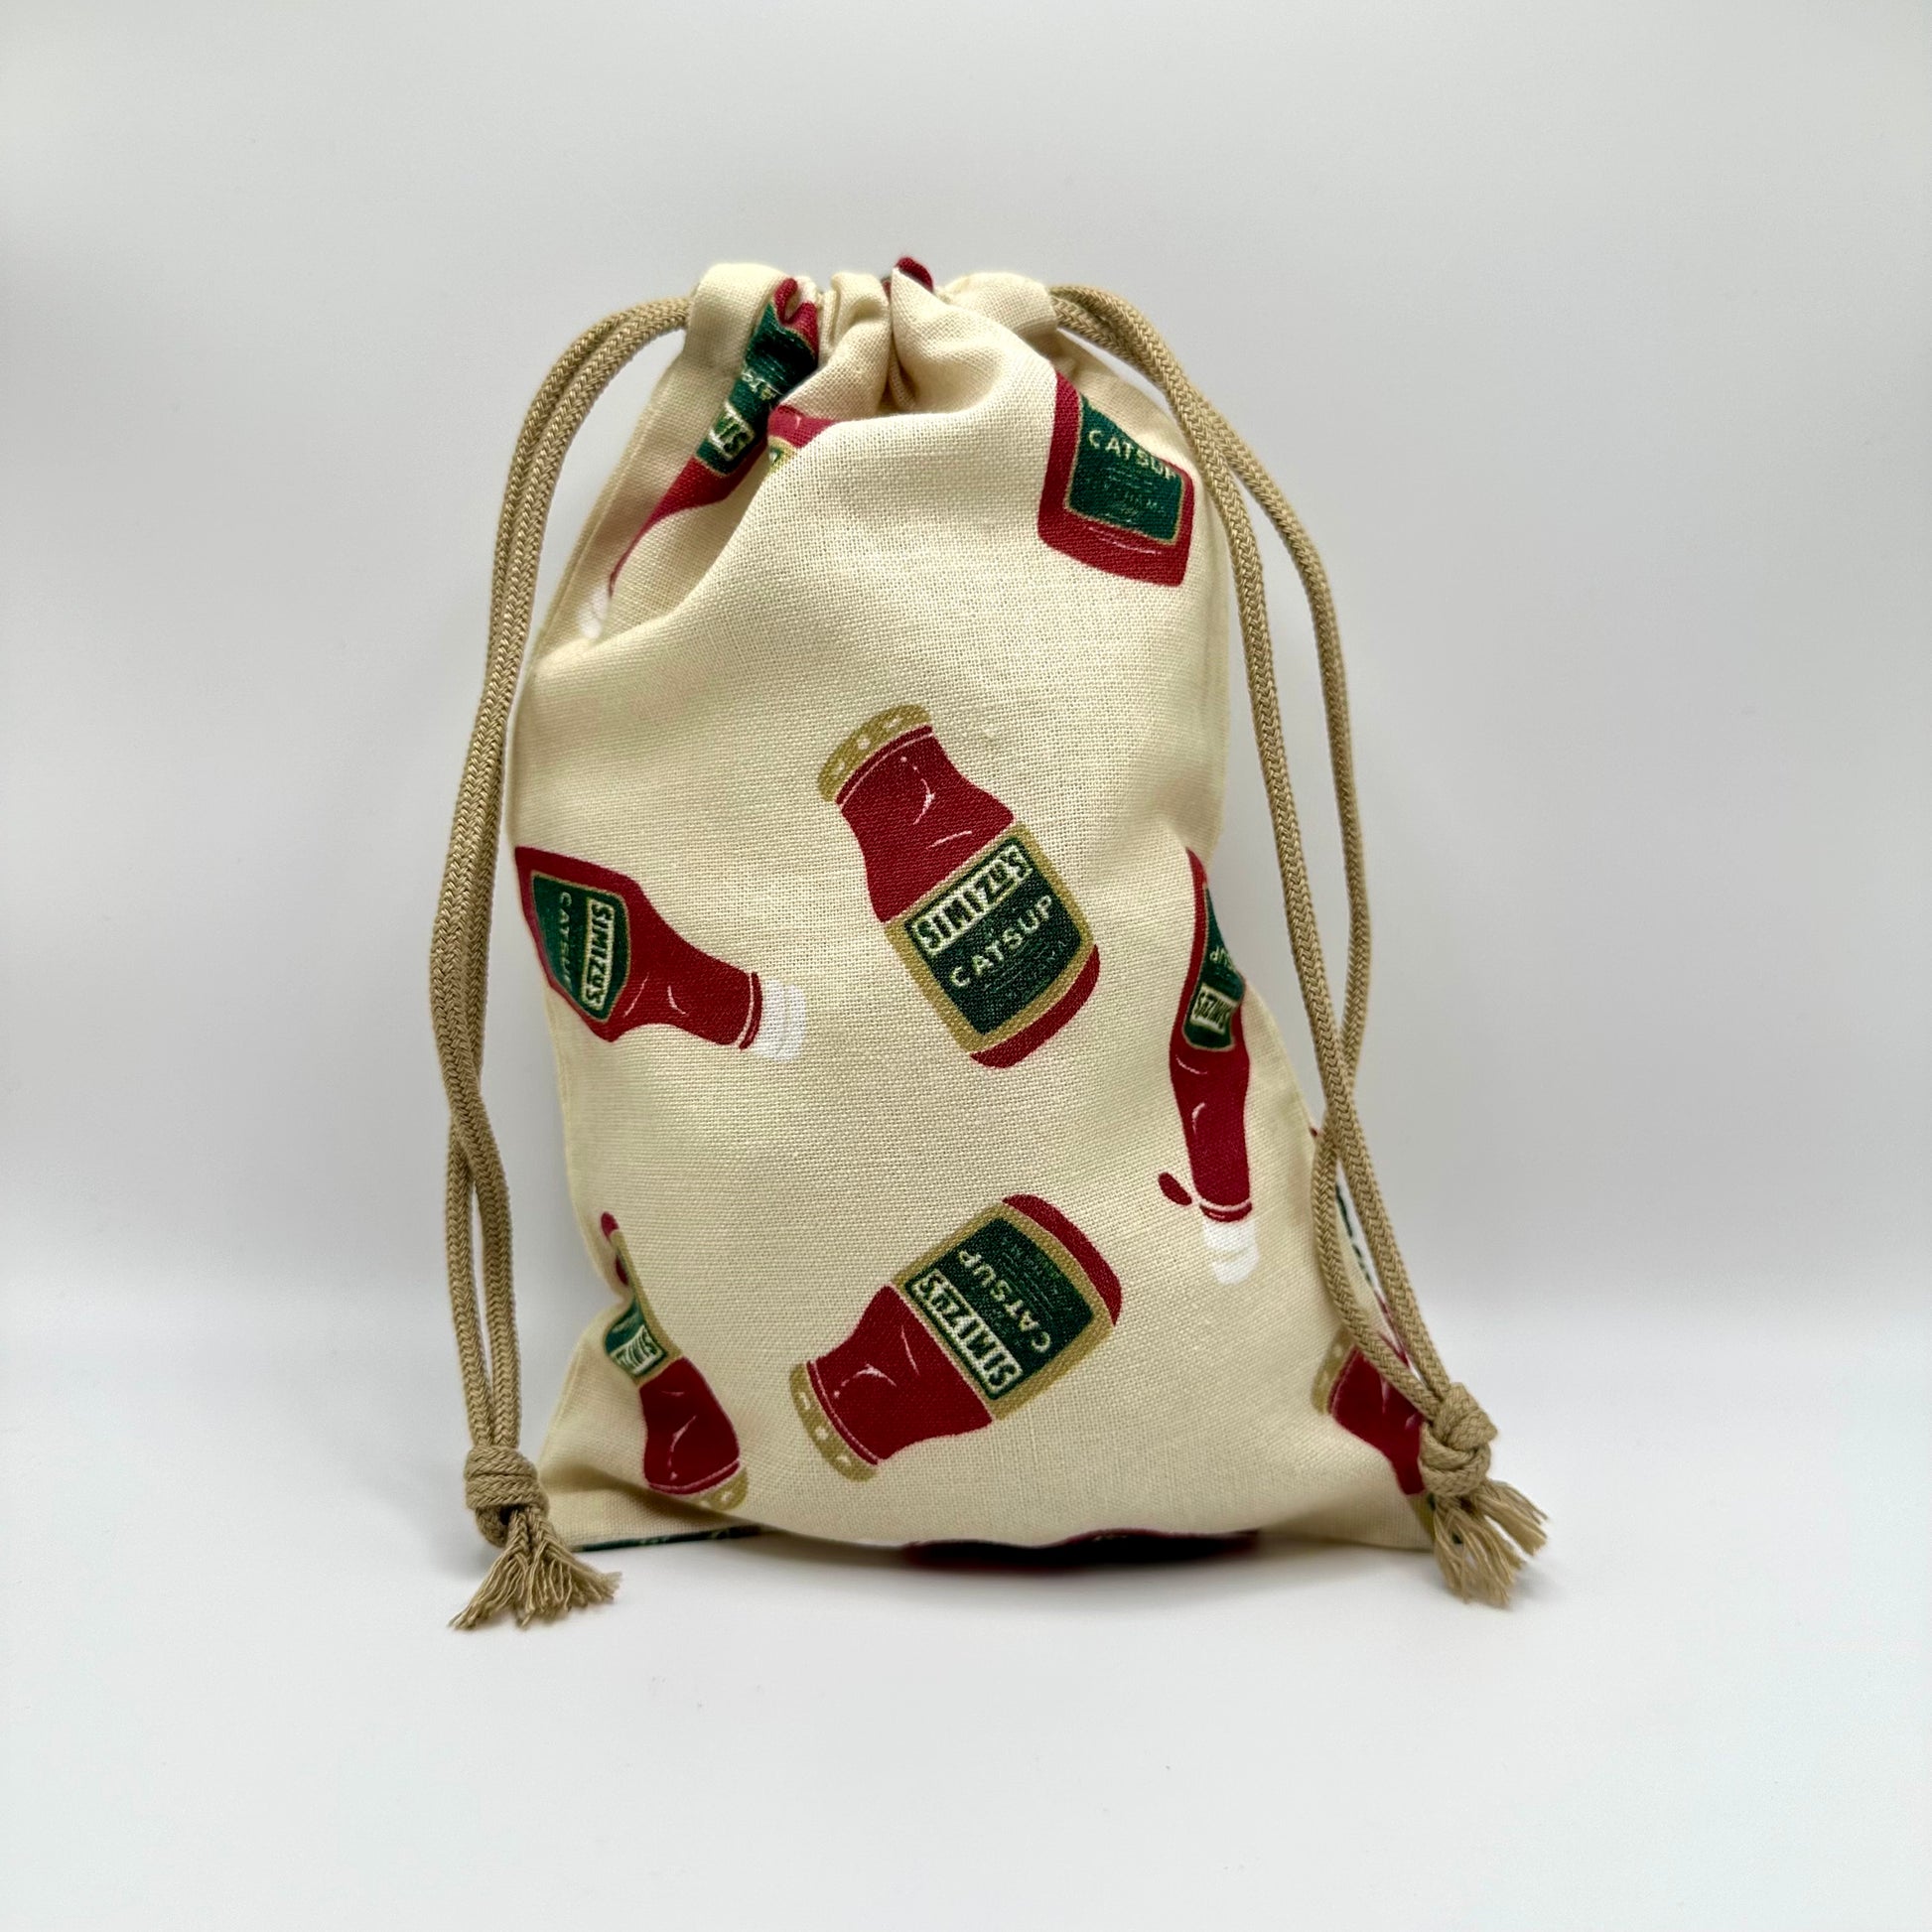 Drawstring pouch with assorted catsup bottles all over it.  